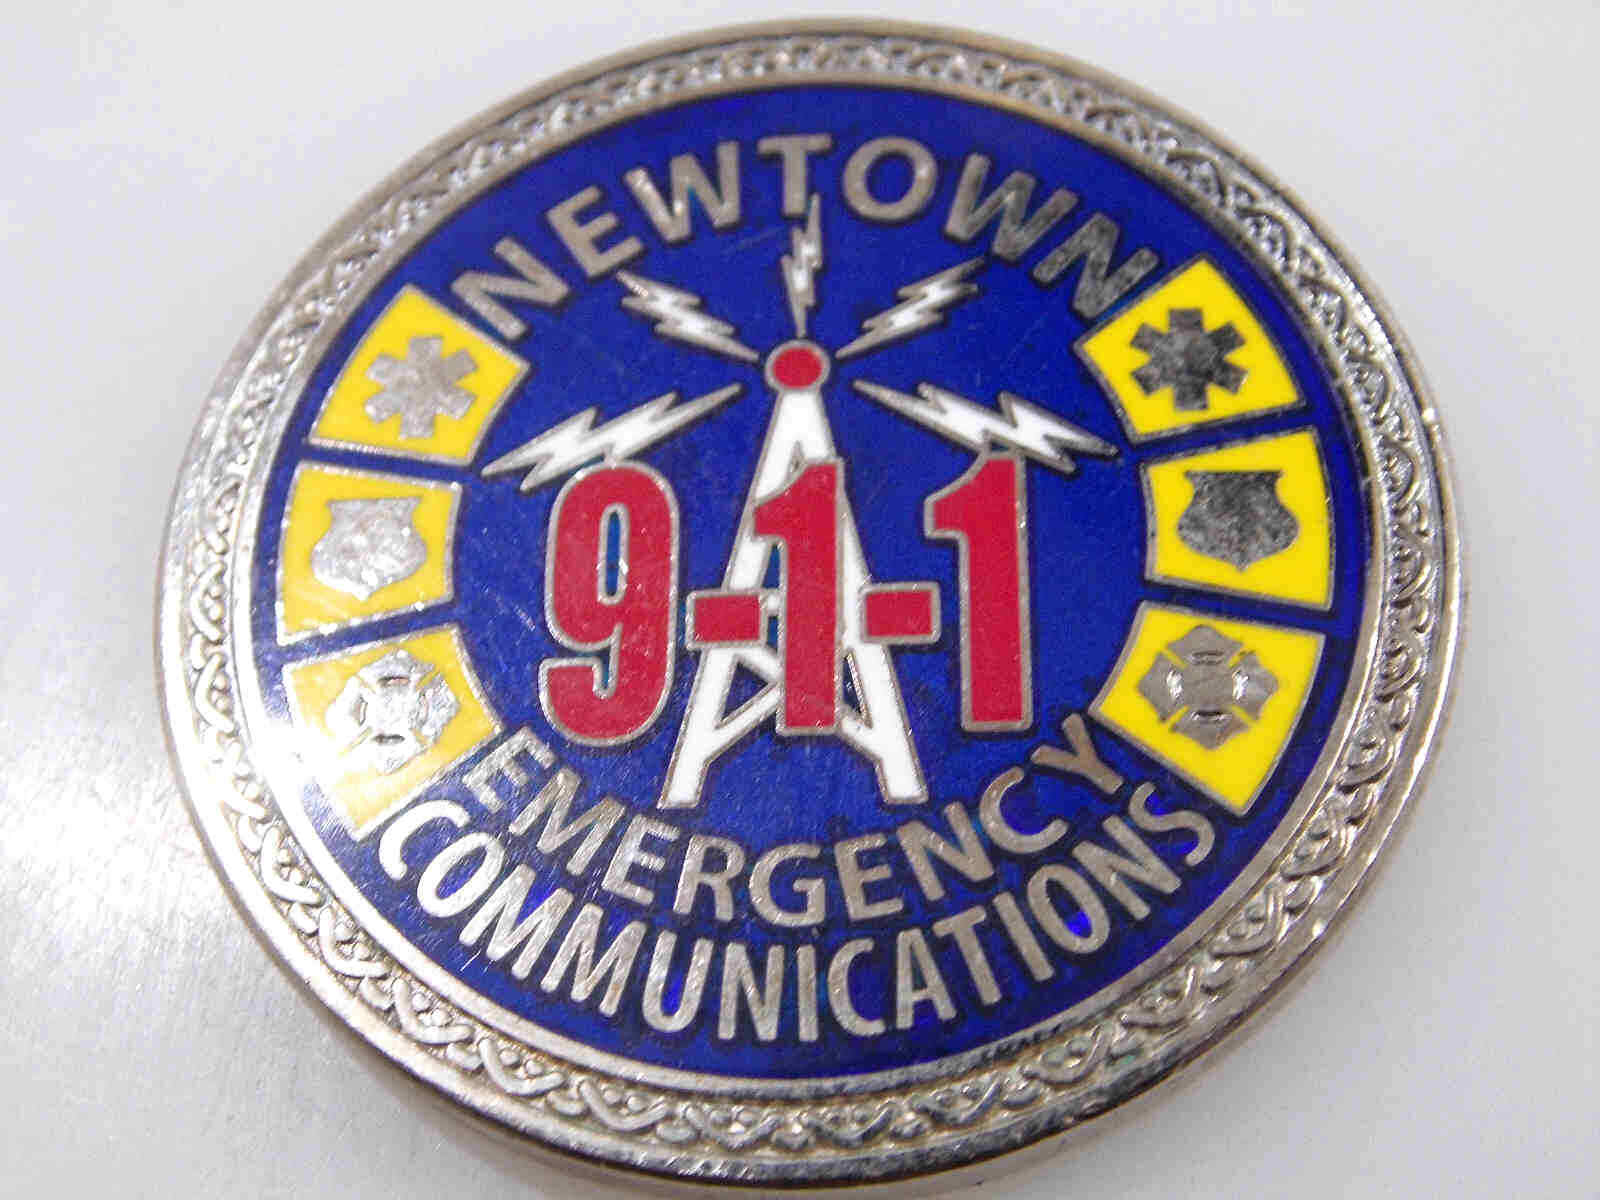 NEWTOWN EMERGENCY COMMUNICATIONS 9-1-1 CHALLENGE COIN